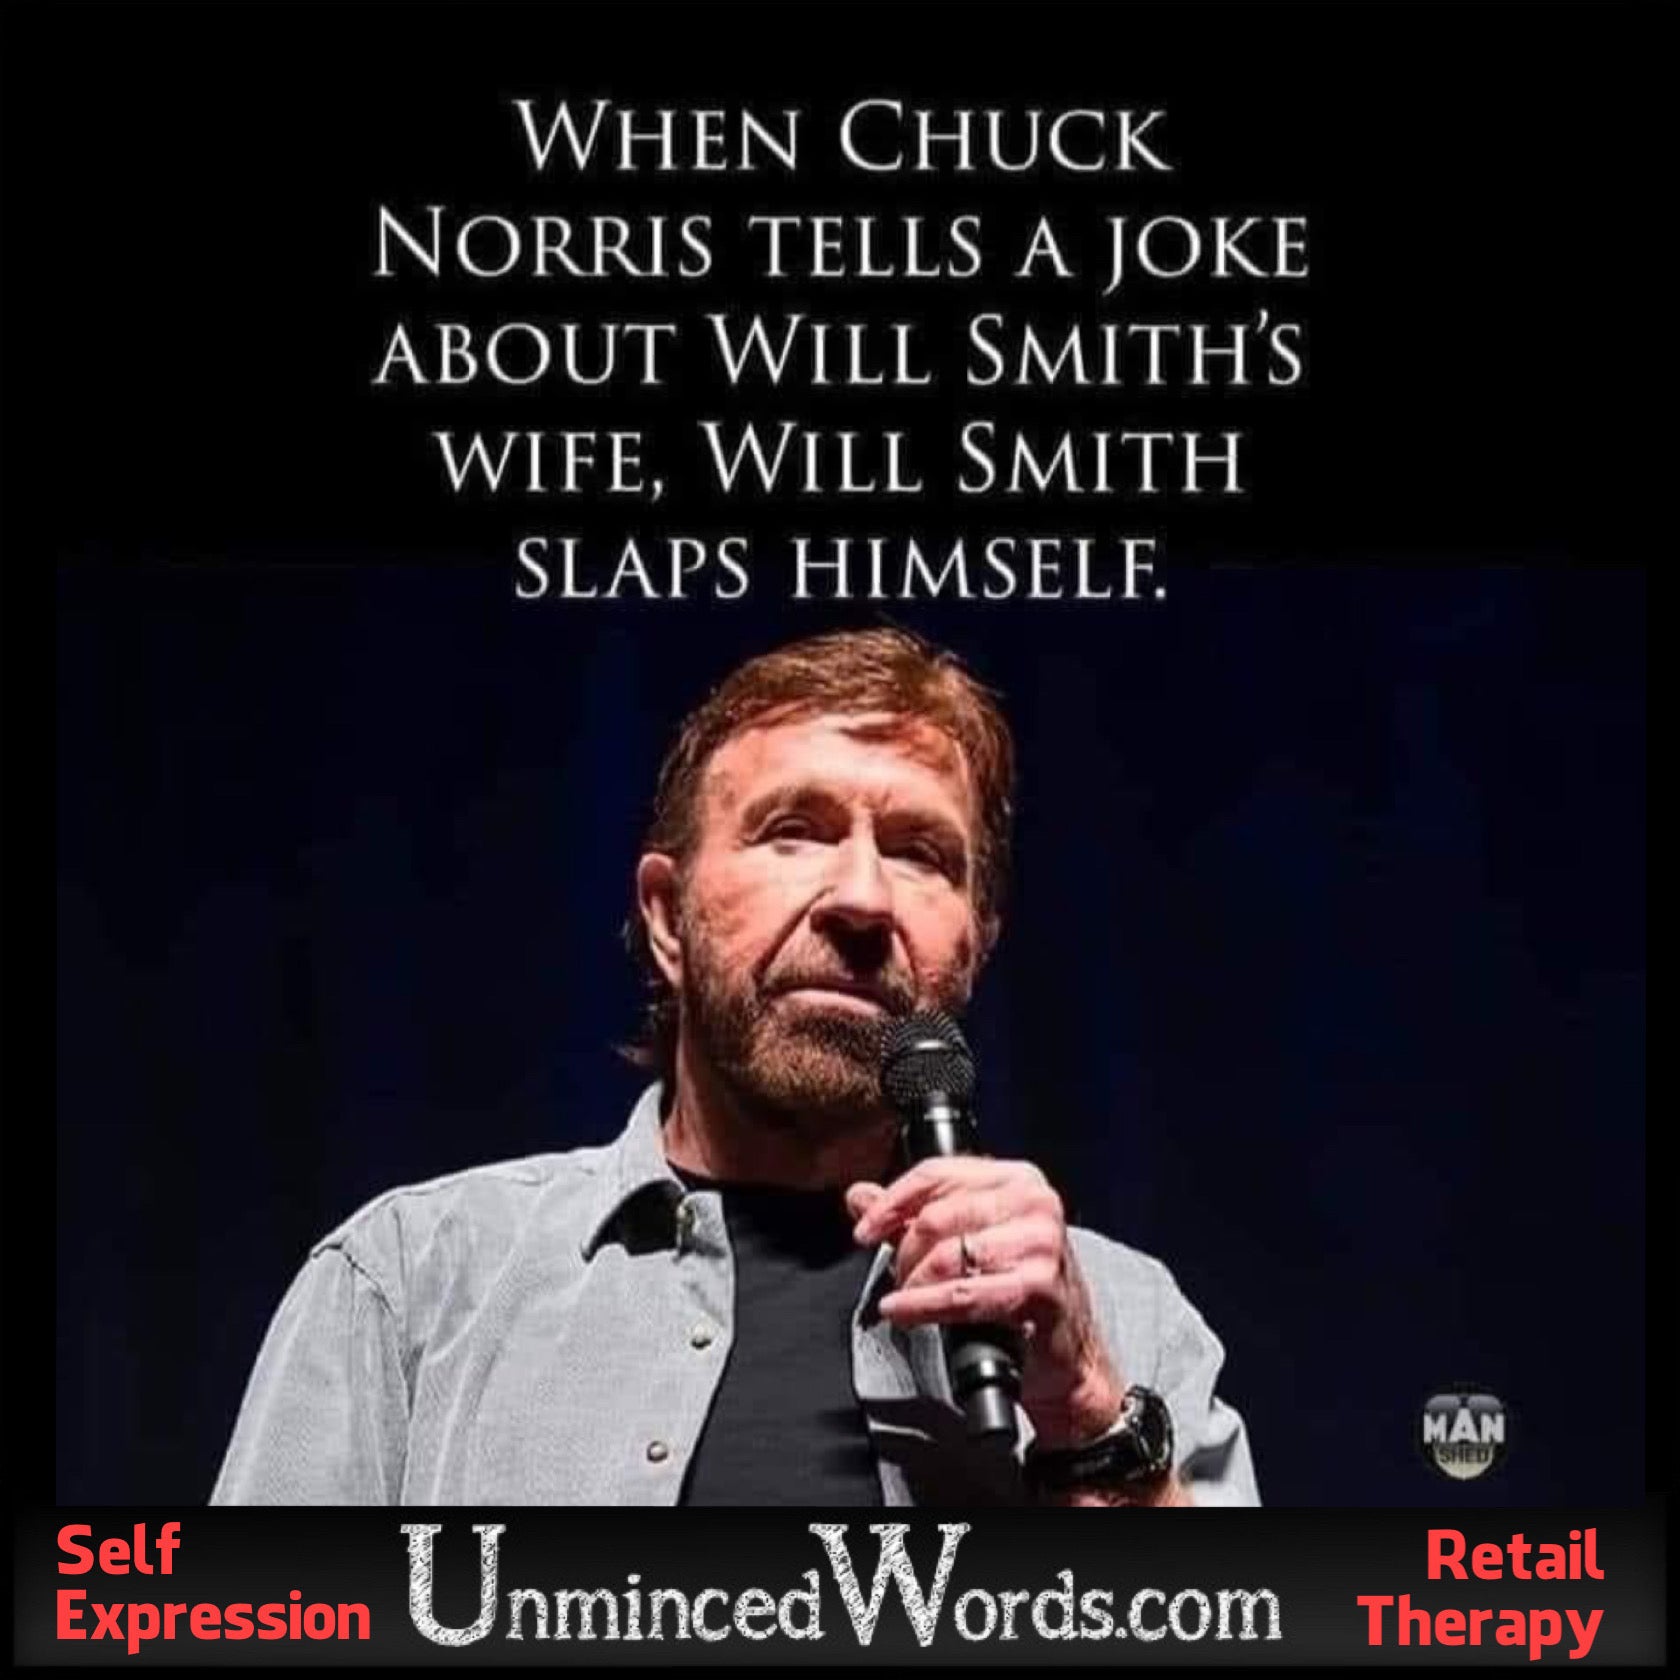 When Chuck Norris tells a joke about Will Smith’s wife…